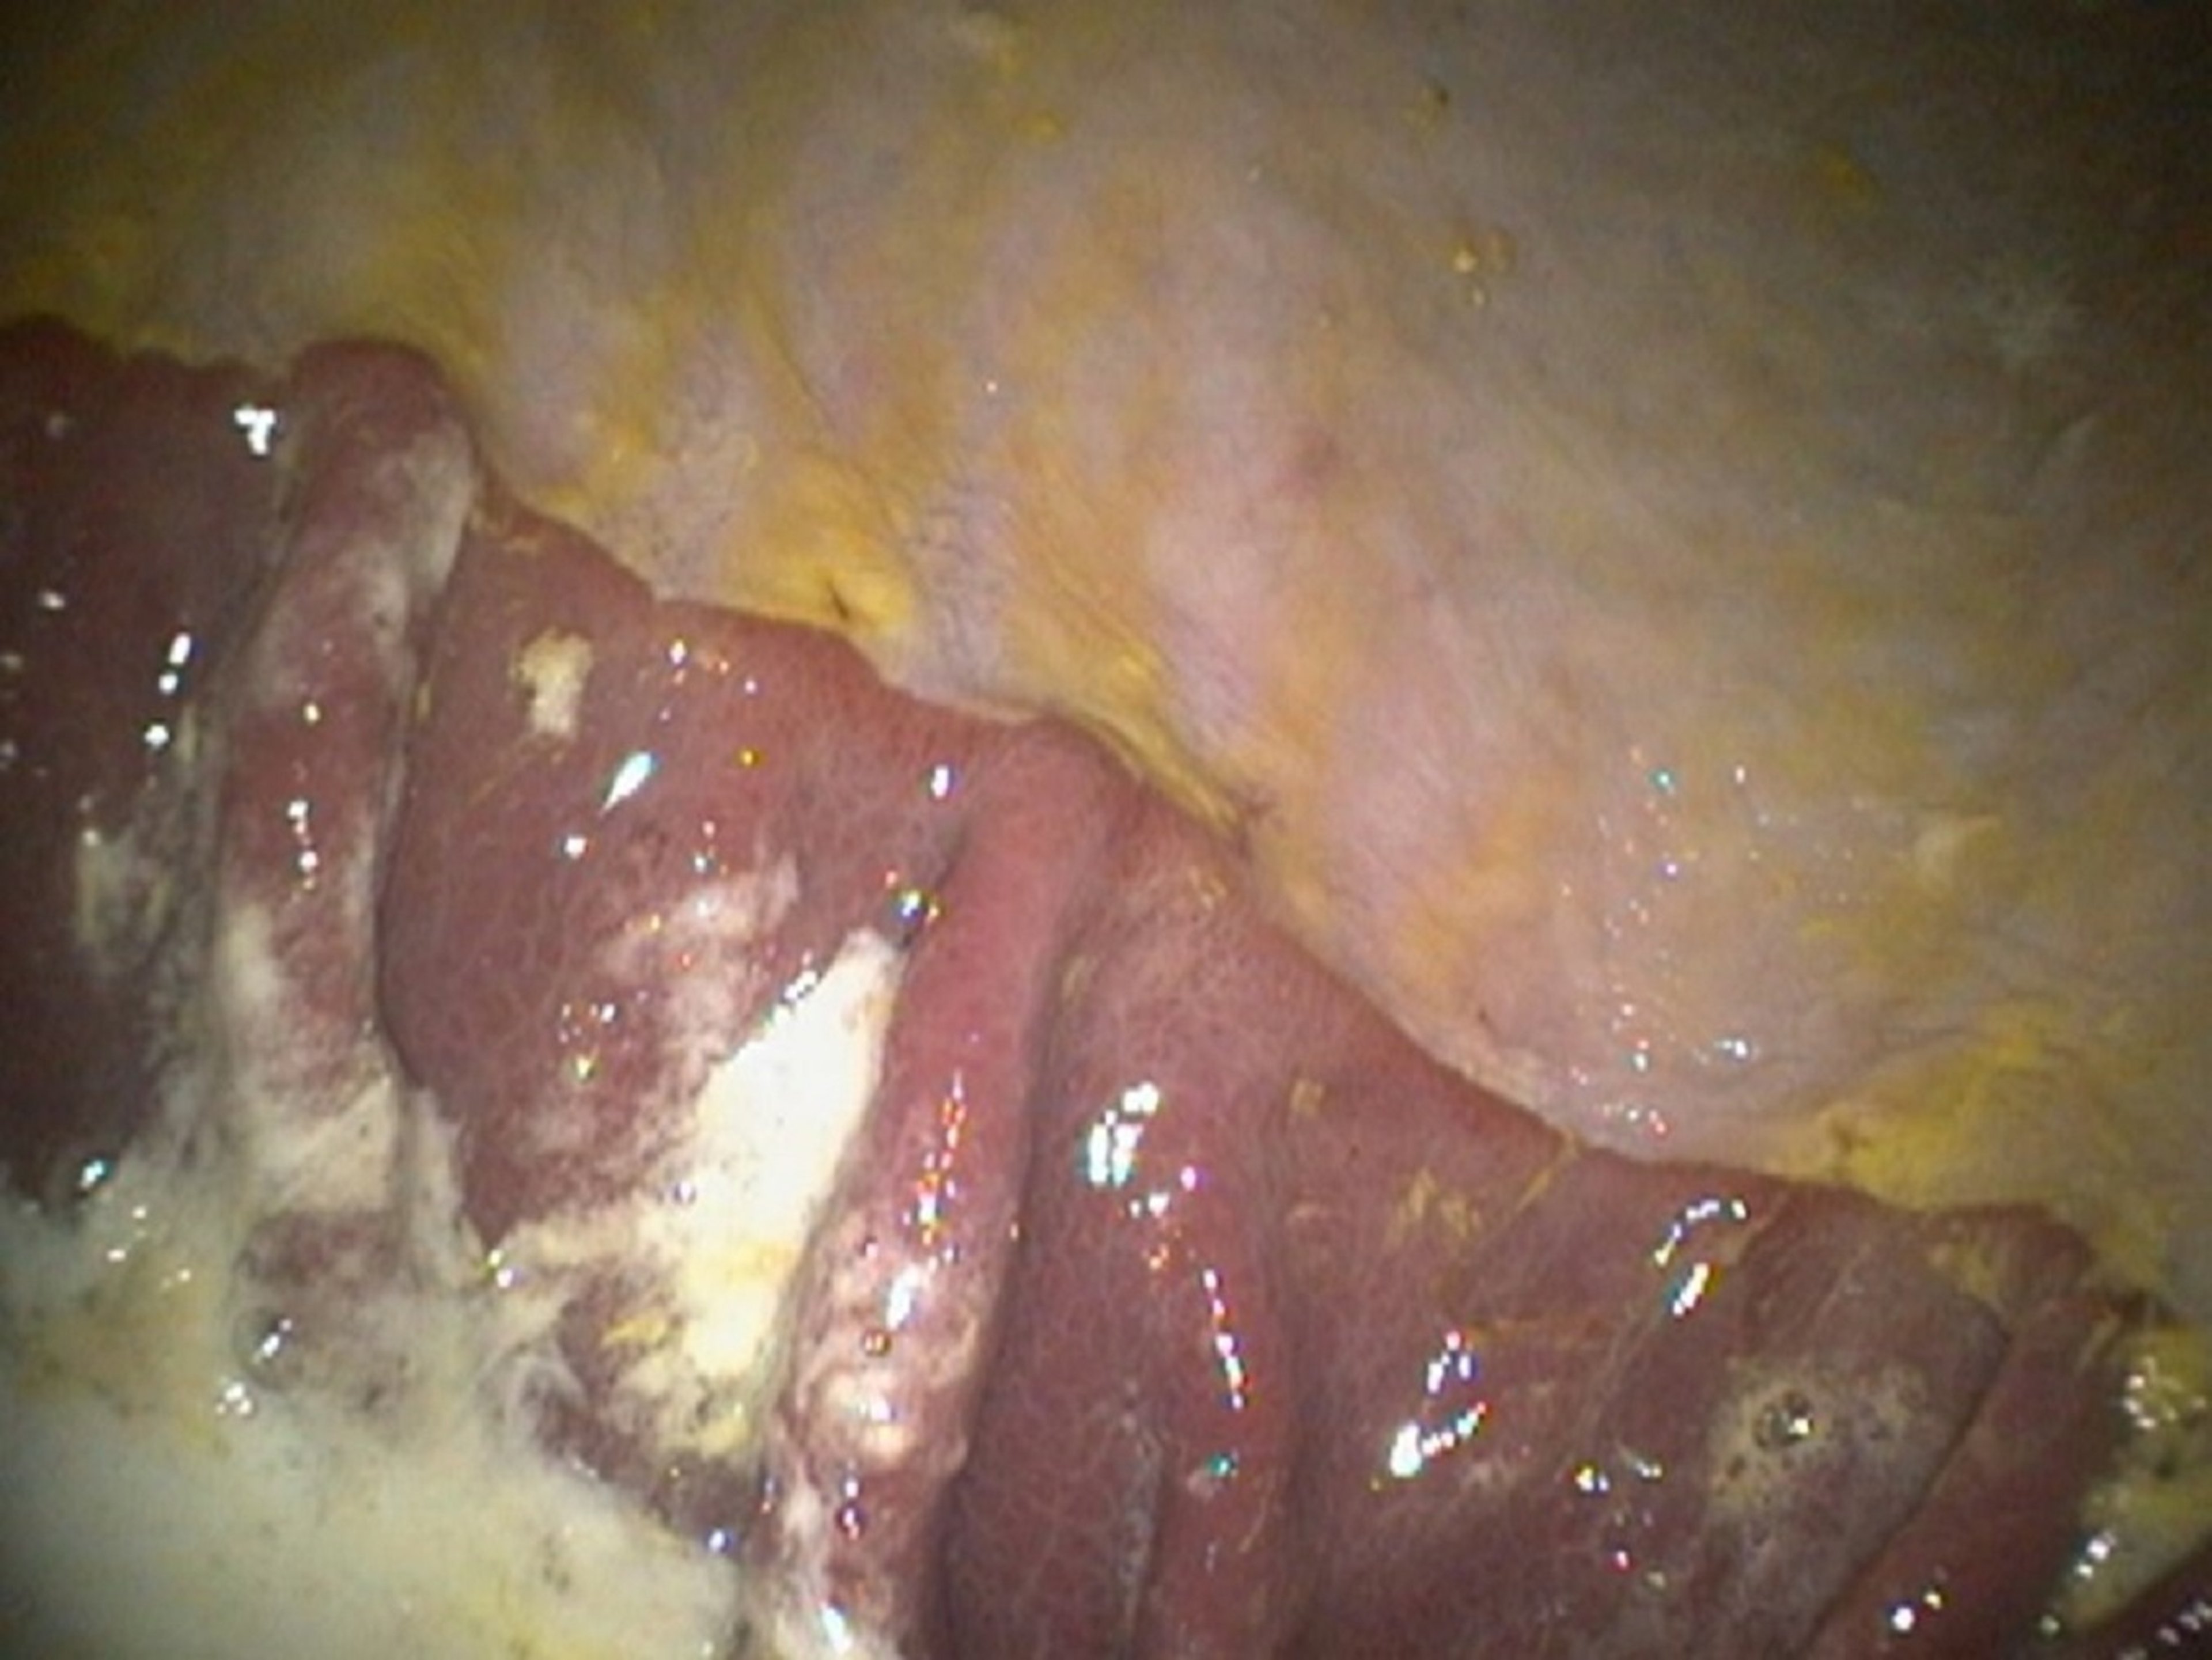 Normal mucosa, stomach, adult horse